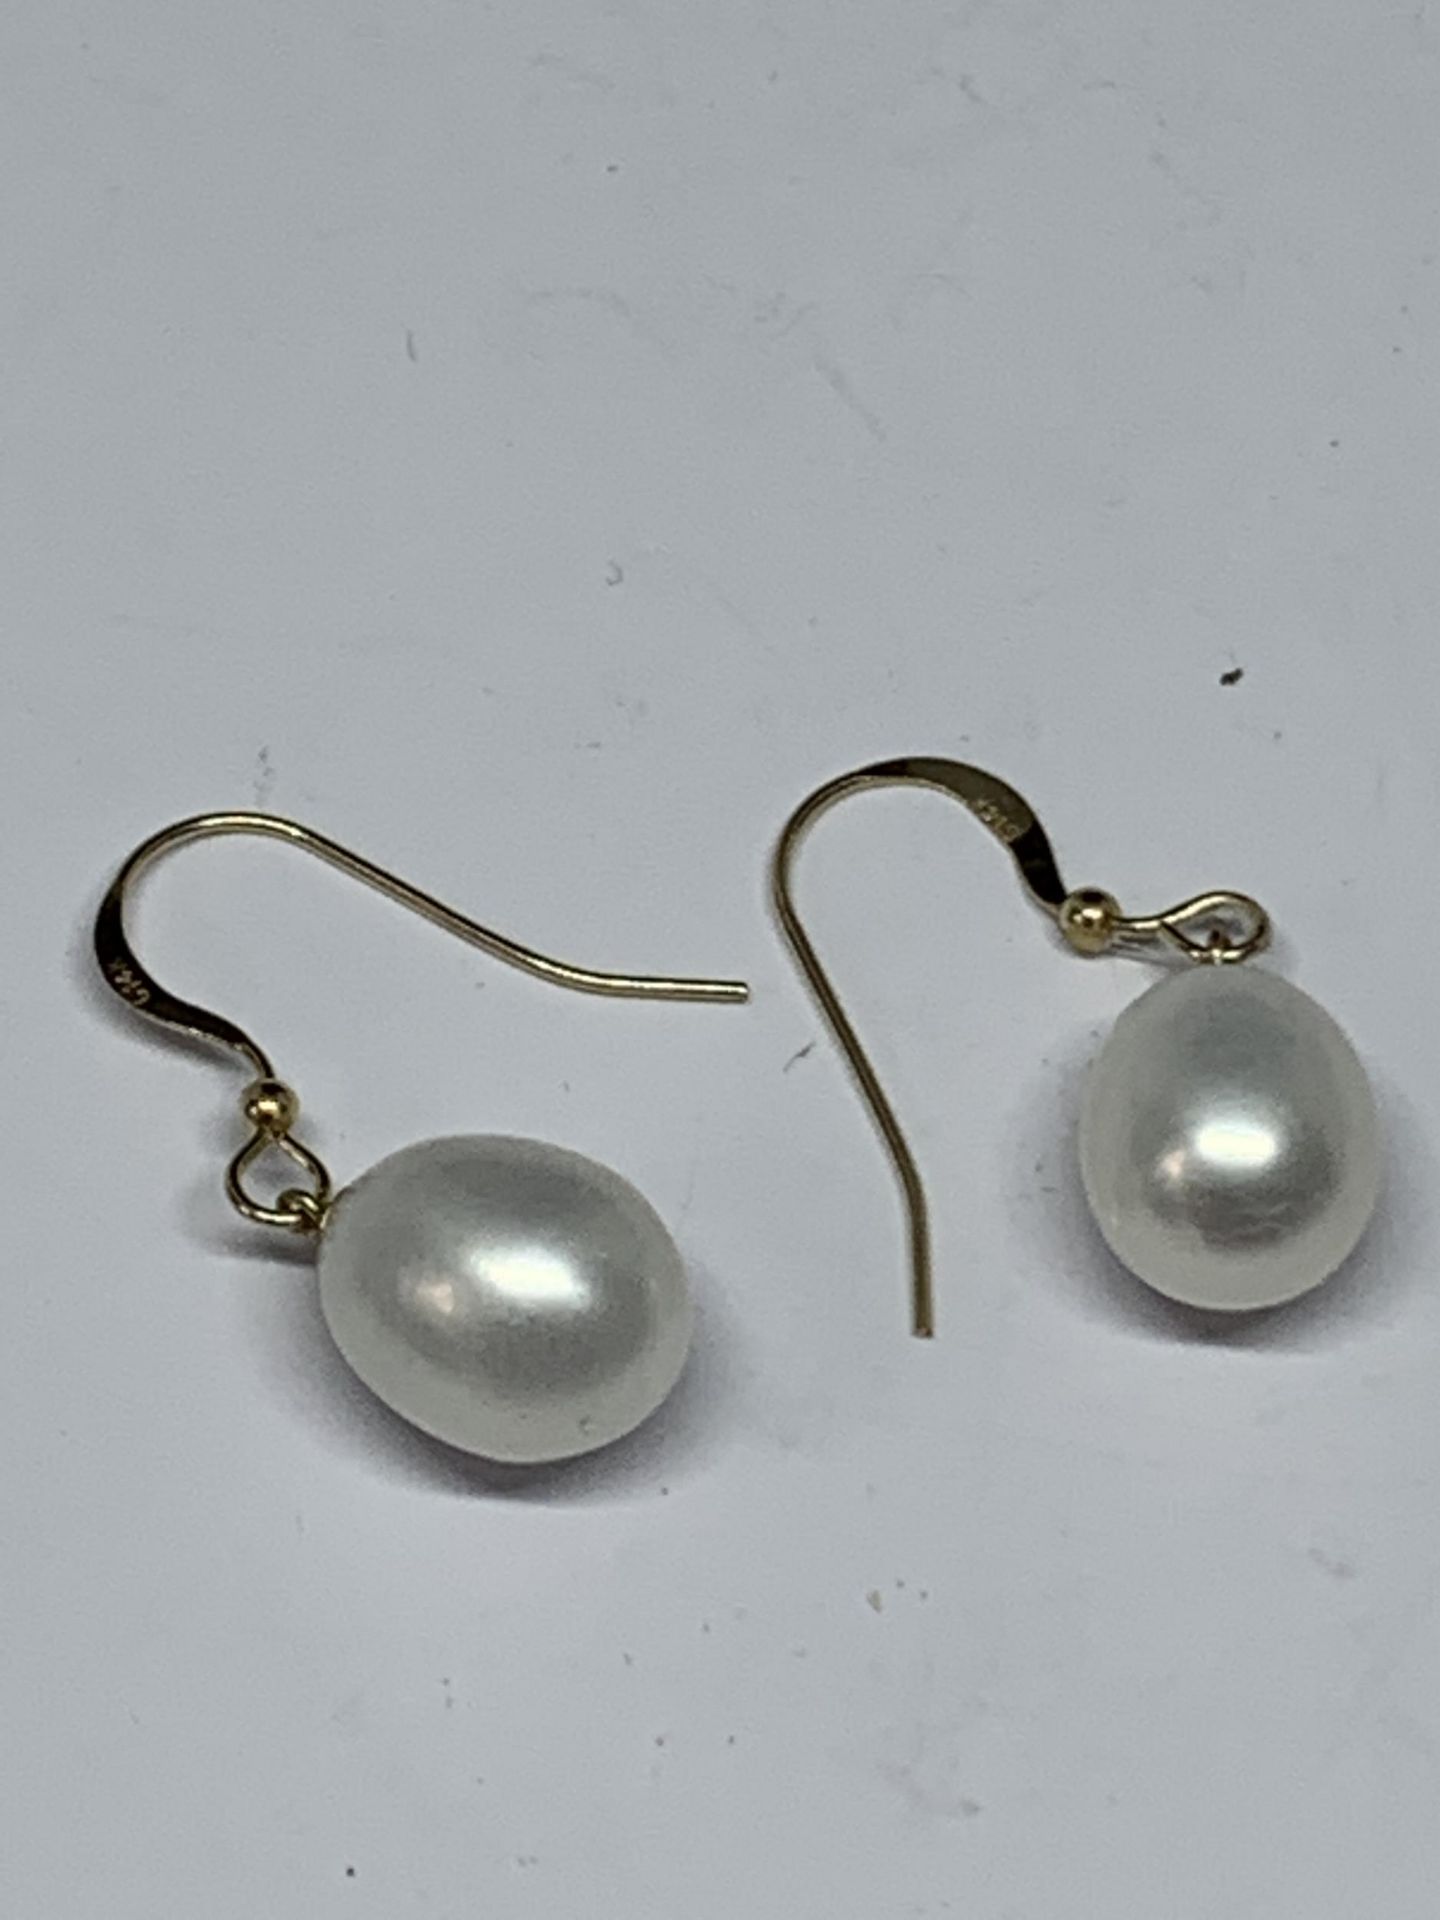 A PAIR OF 14 CARAT GOLD AND PEARL EARRINGS GROSS WEIGHT 3.57 GRAMS - Image 3 of 3